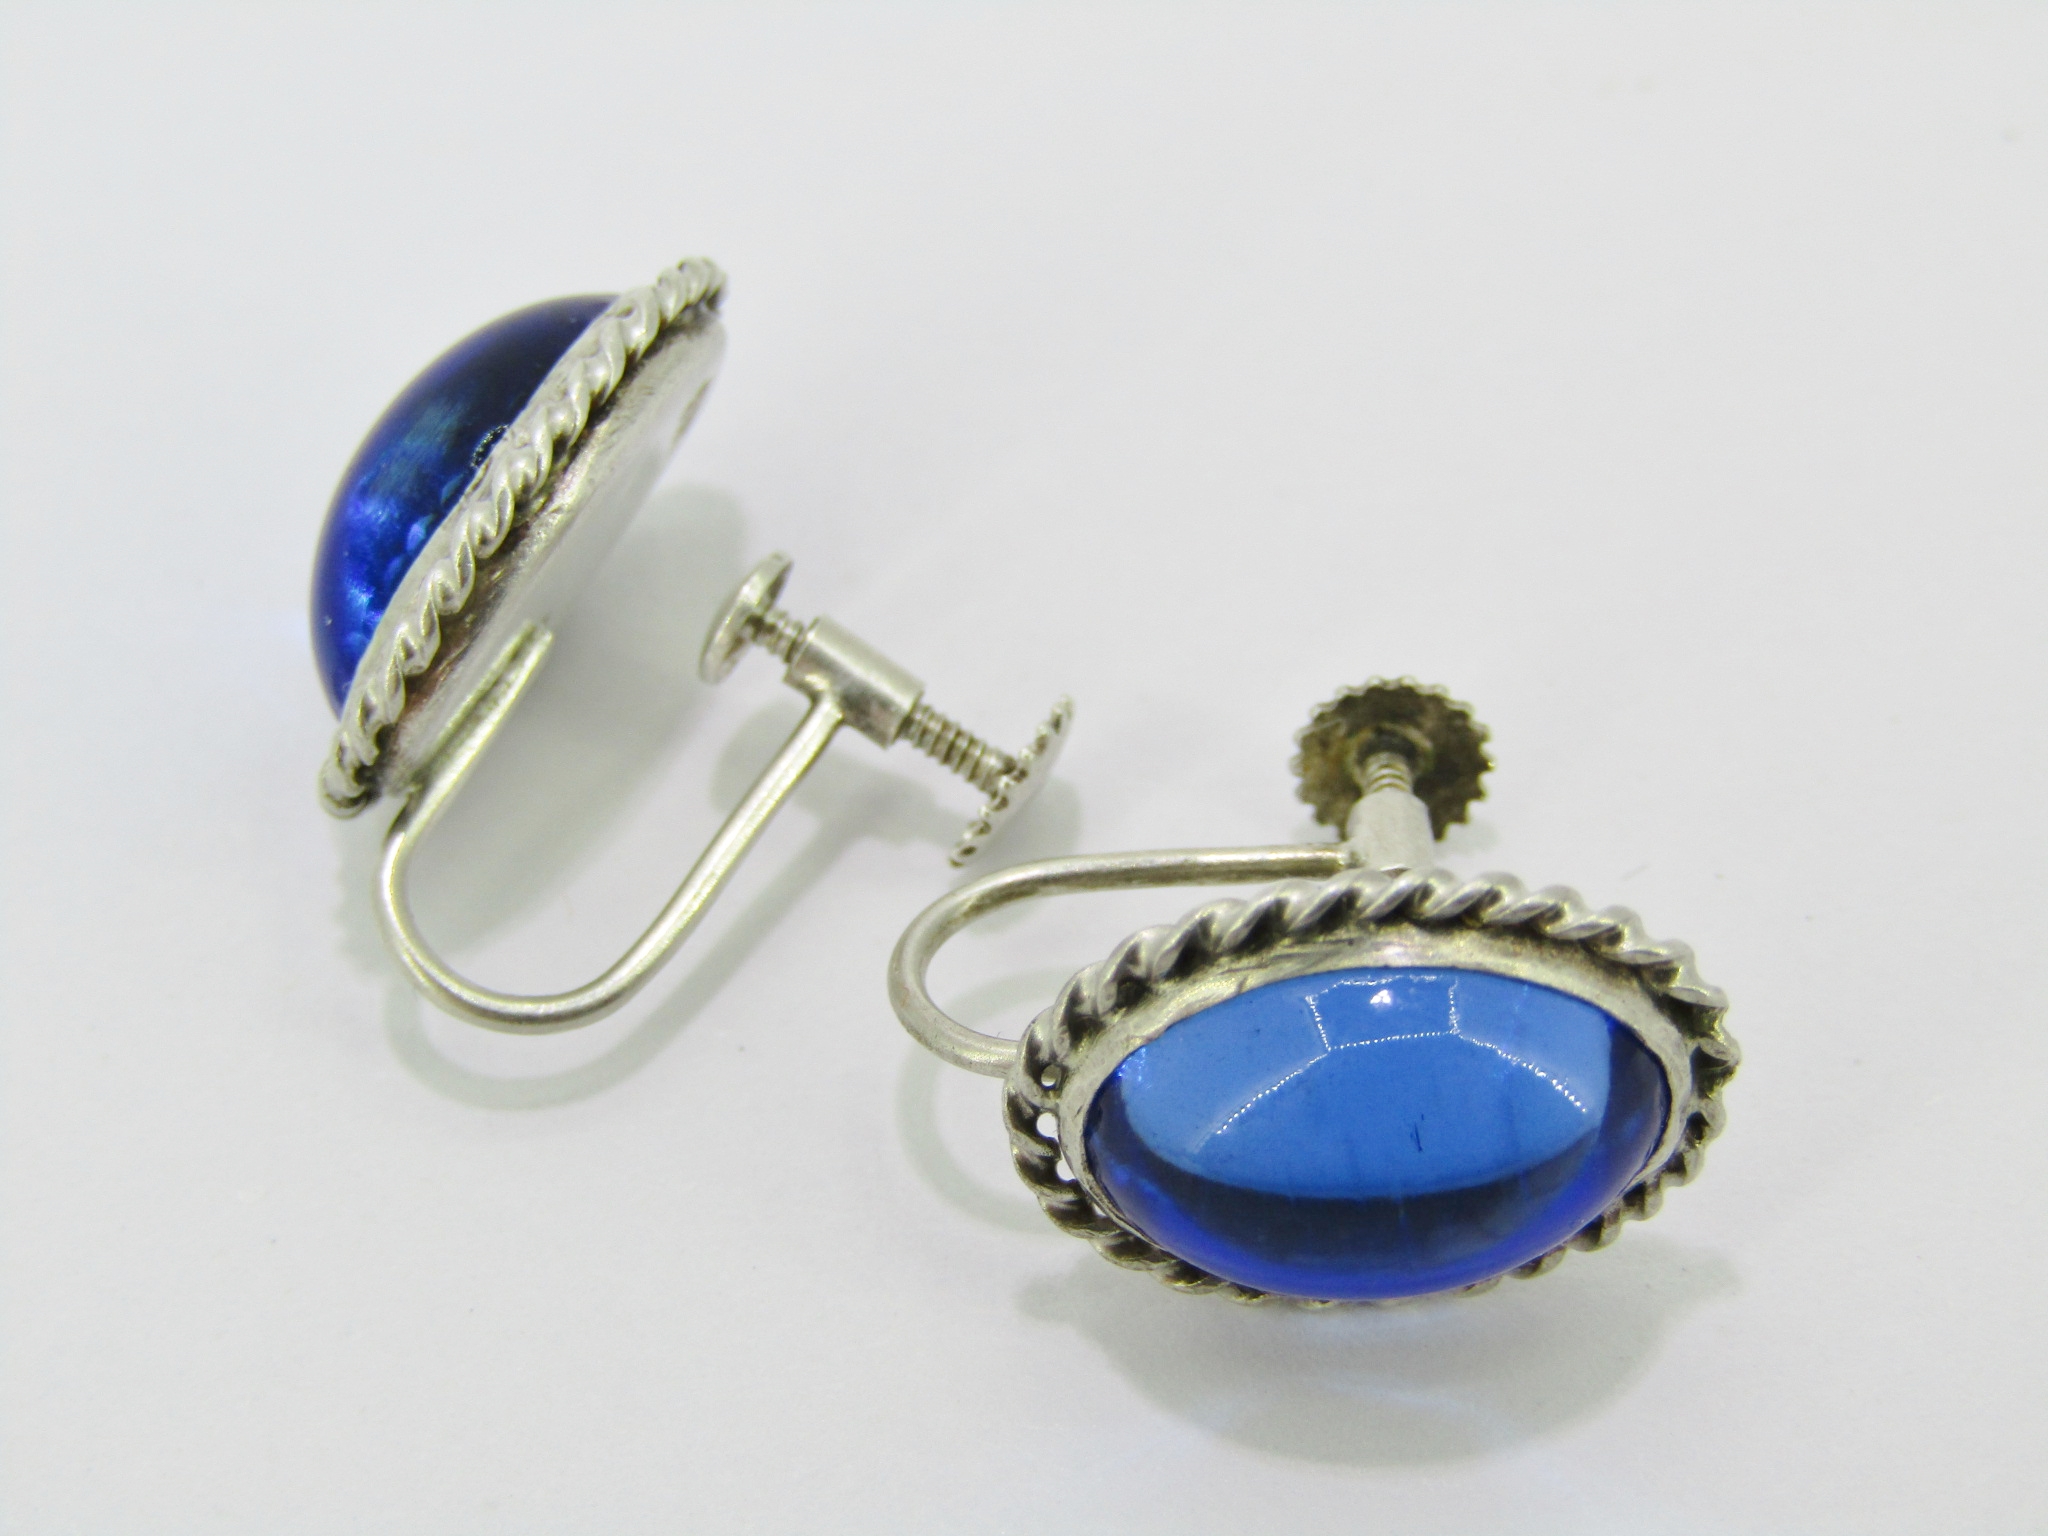 A Gorgeous Vintage Pair of Blue Paste Stone Screw Back Earrings in Sterling Silver.